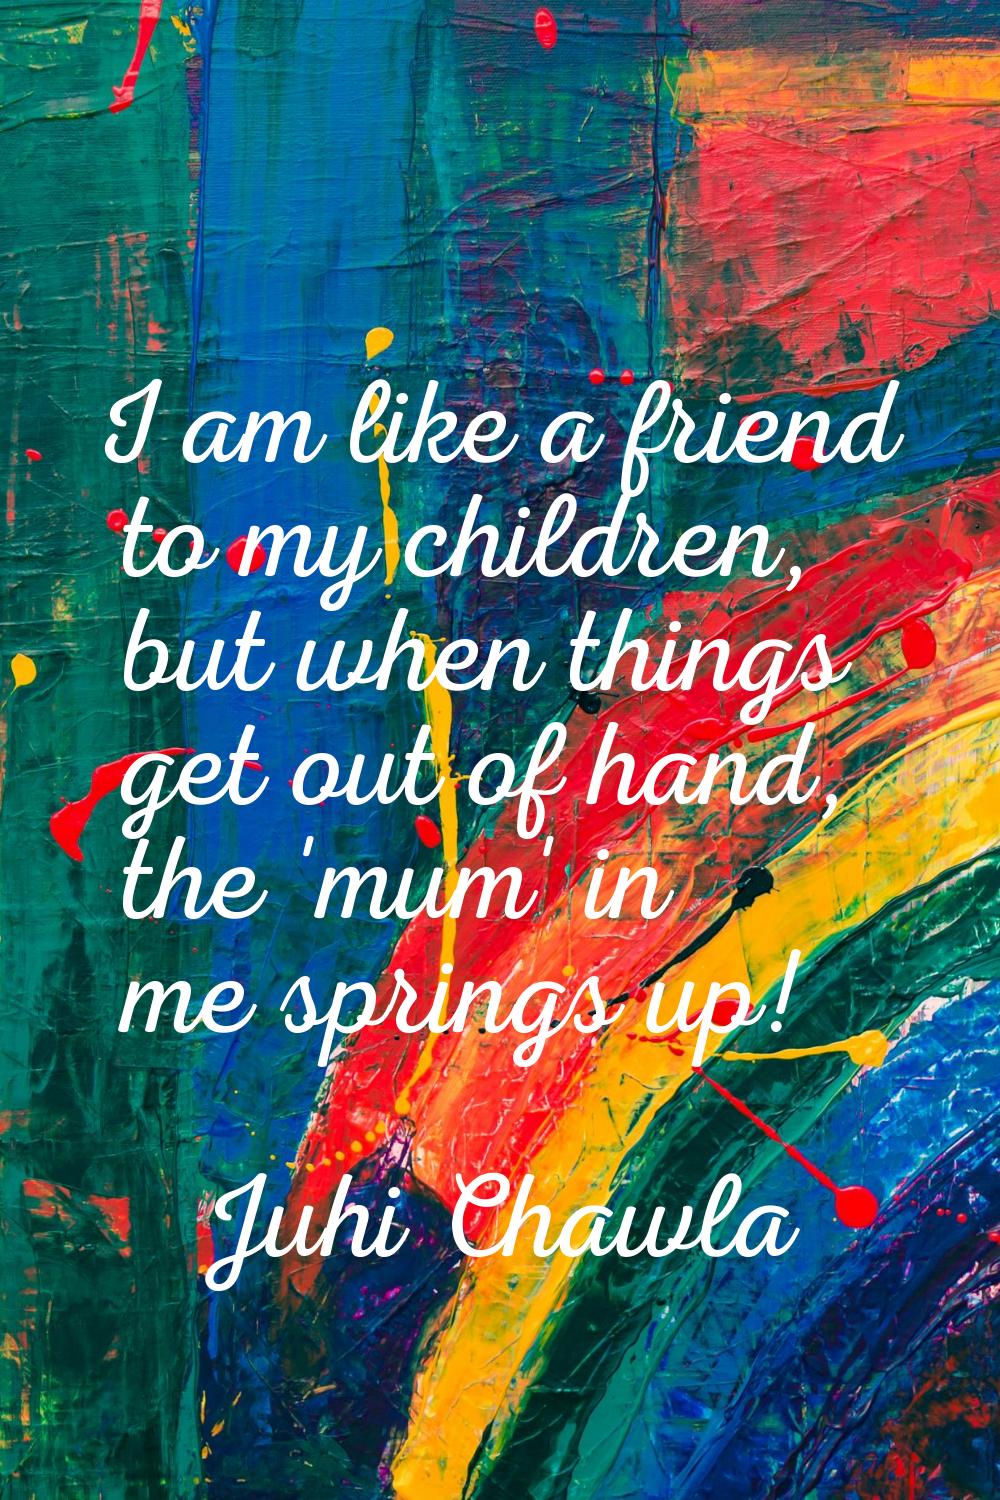 I am like a friend to my children, but when things get out of hand, the 'mum' in me springs up!